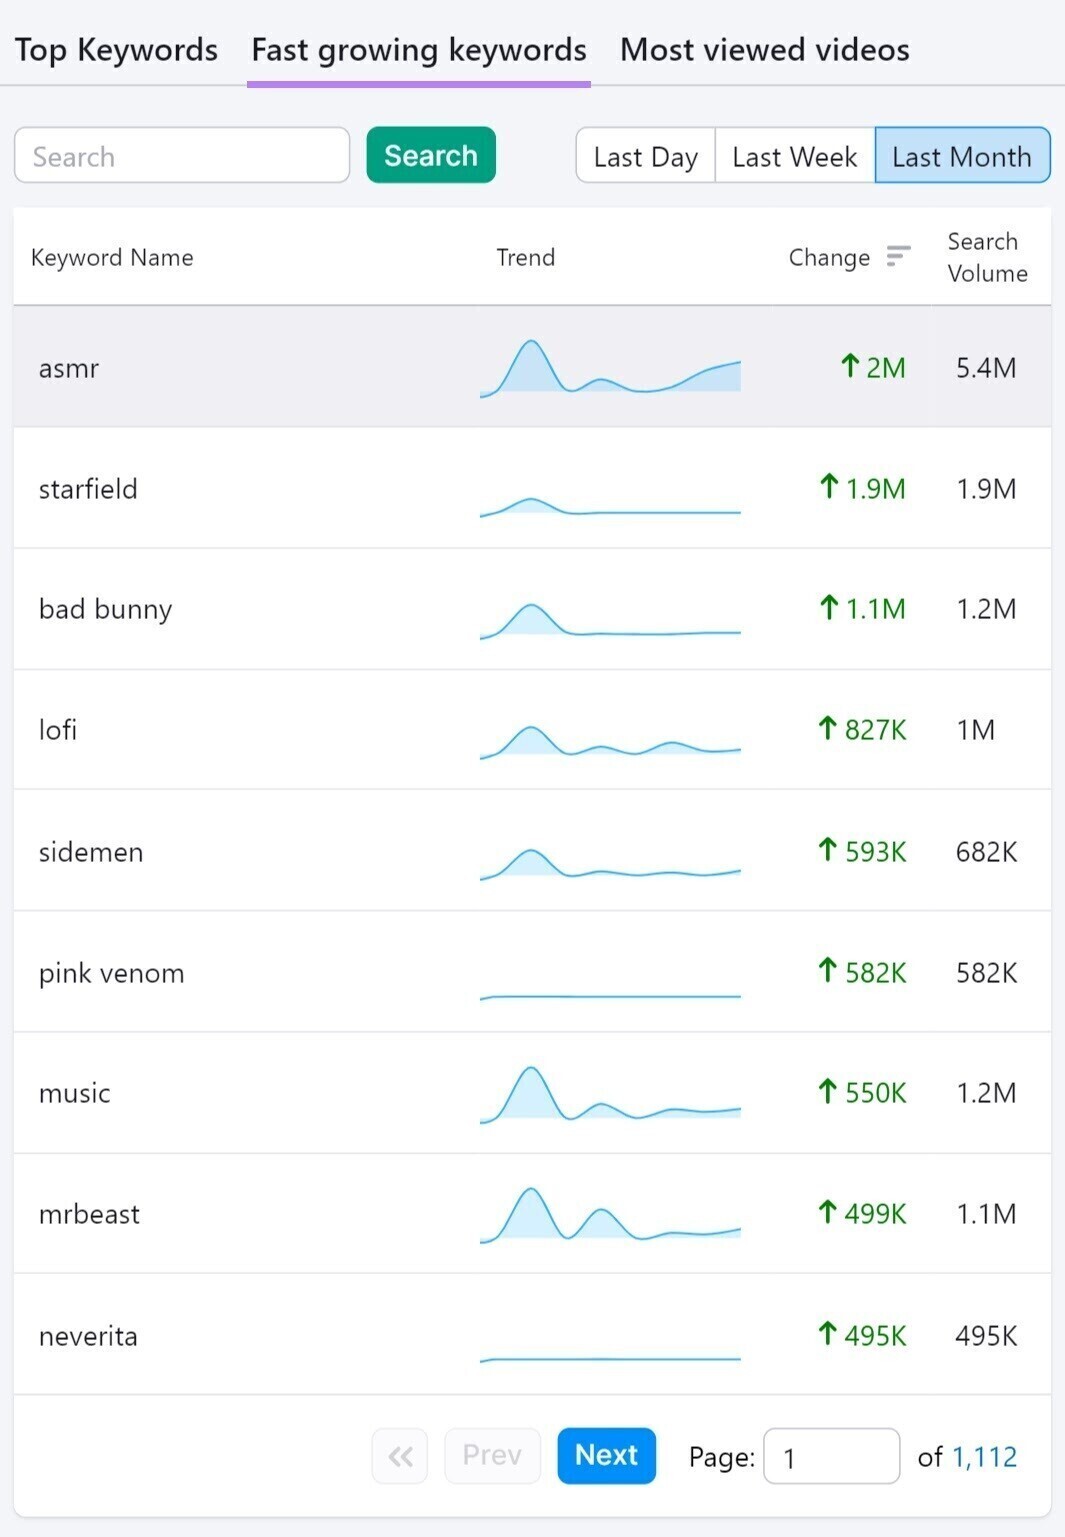 How to Find and Use YouTube Search Trends to Boost Your Channel